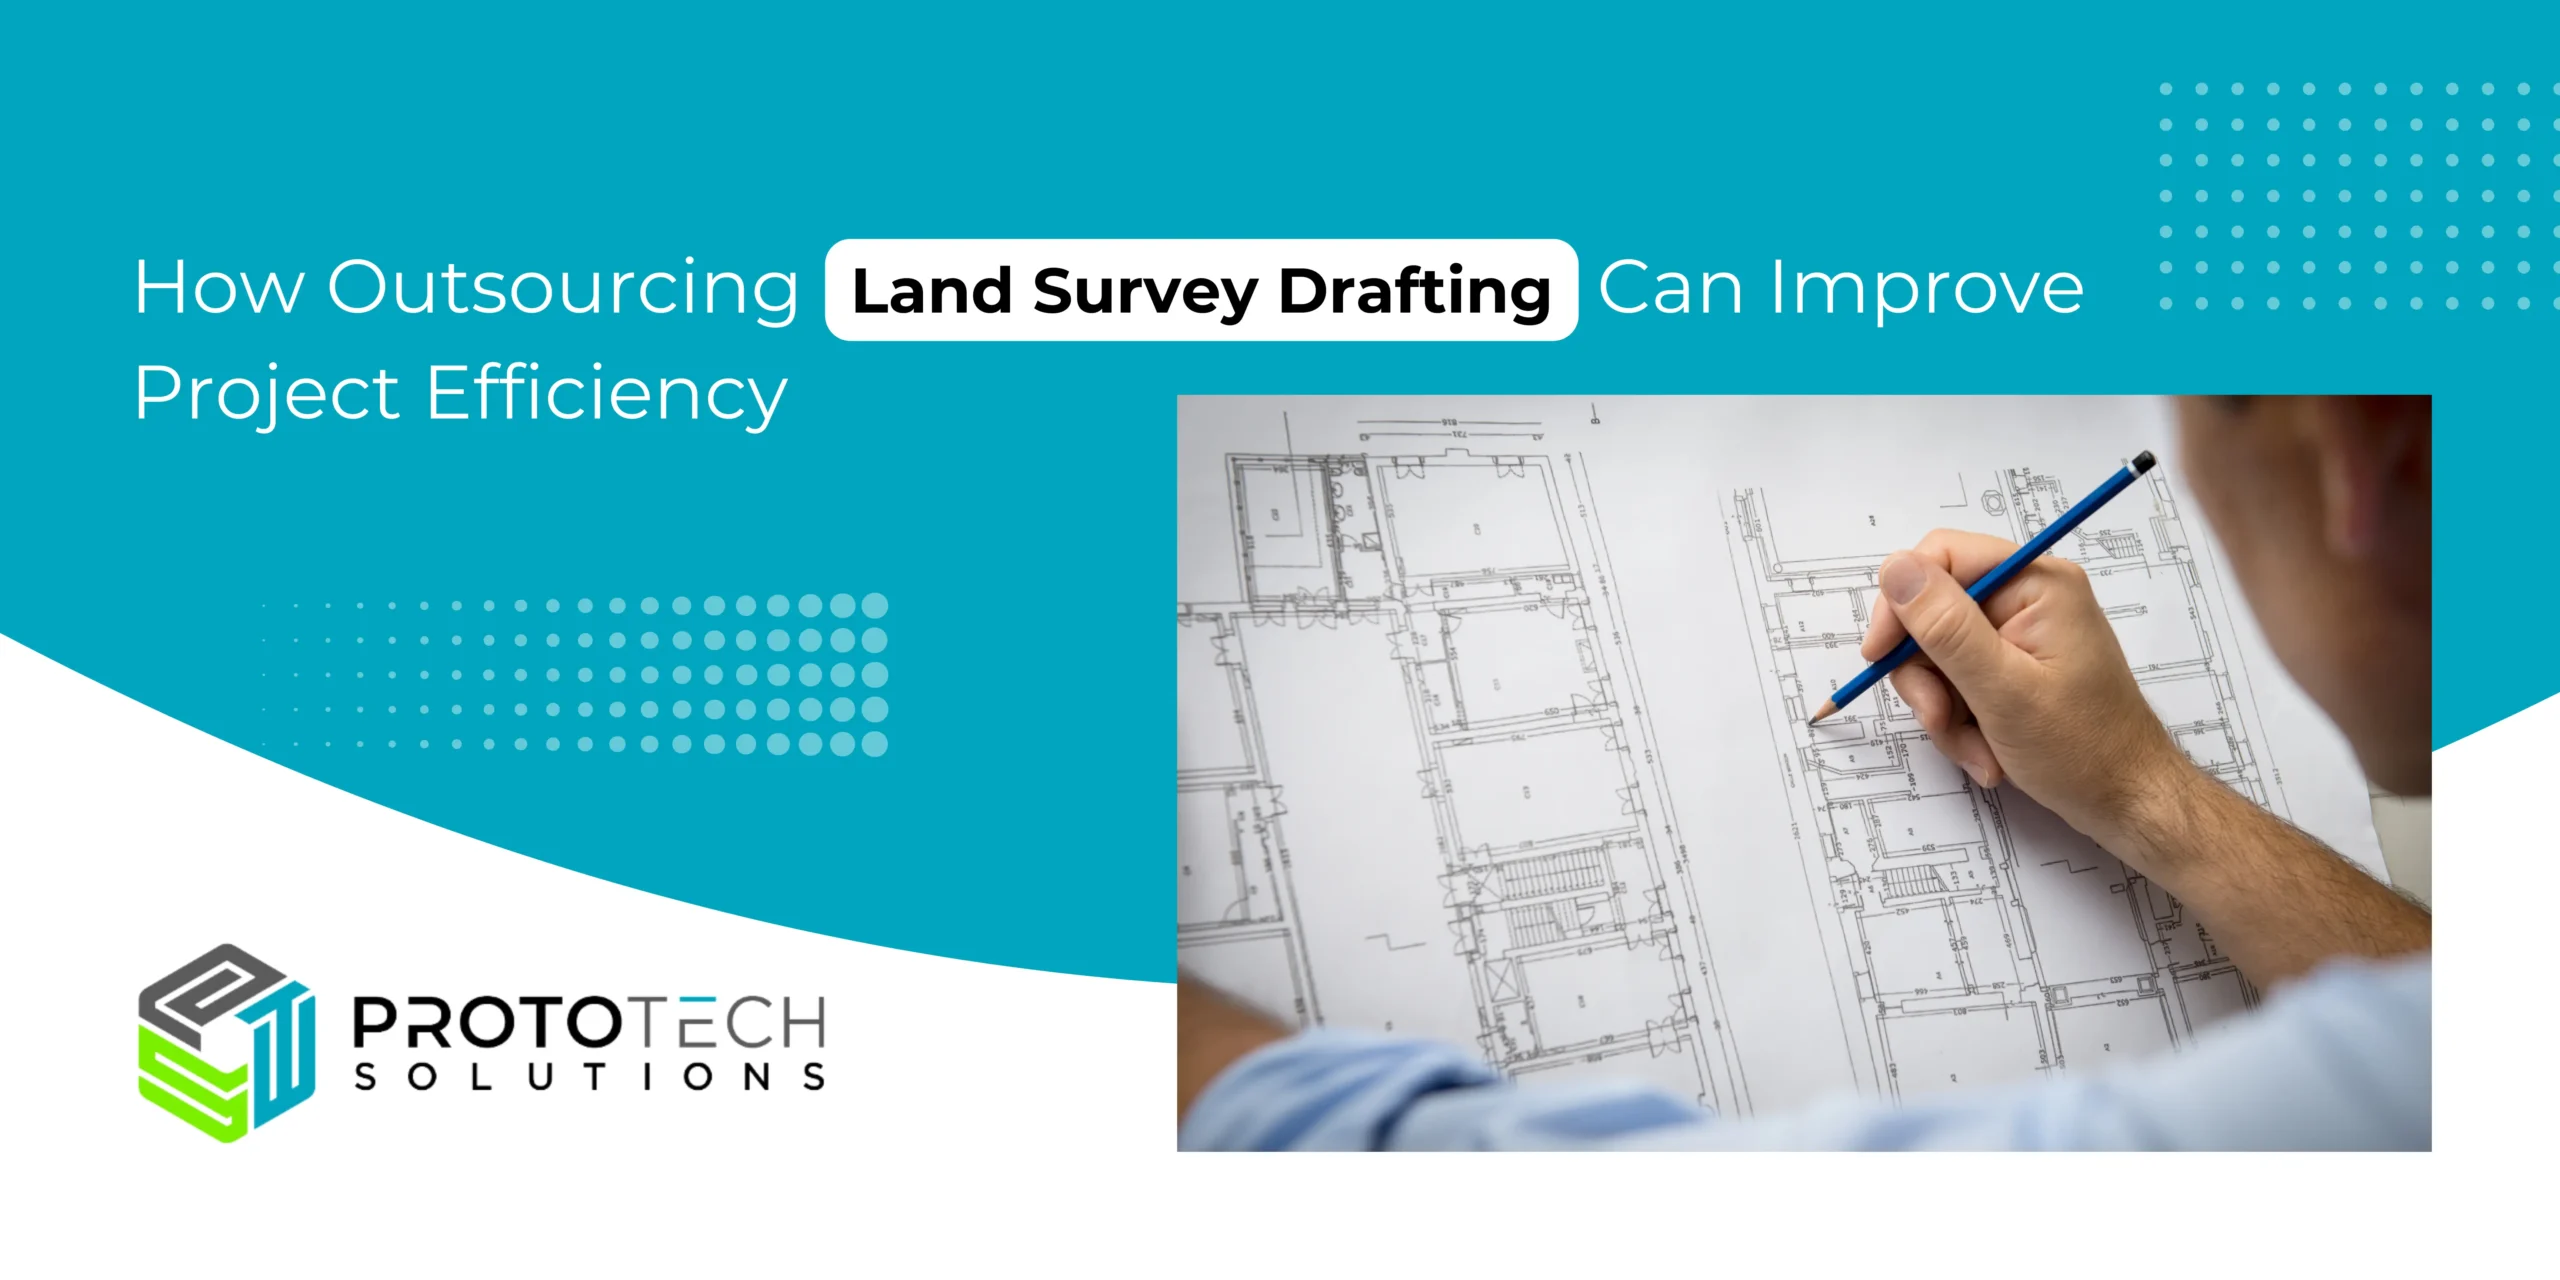 How Outsourcing Land Survey Drafting Can Improve Project Efficiency